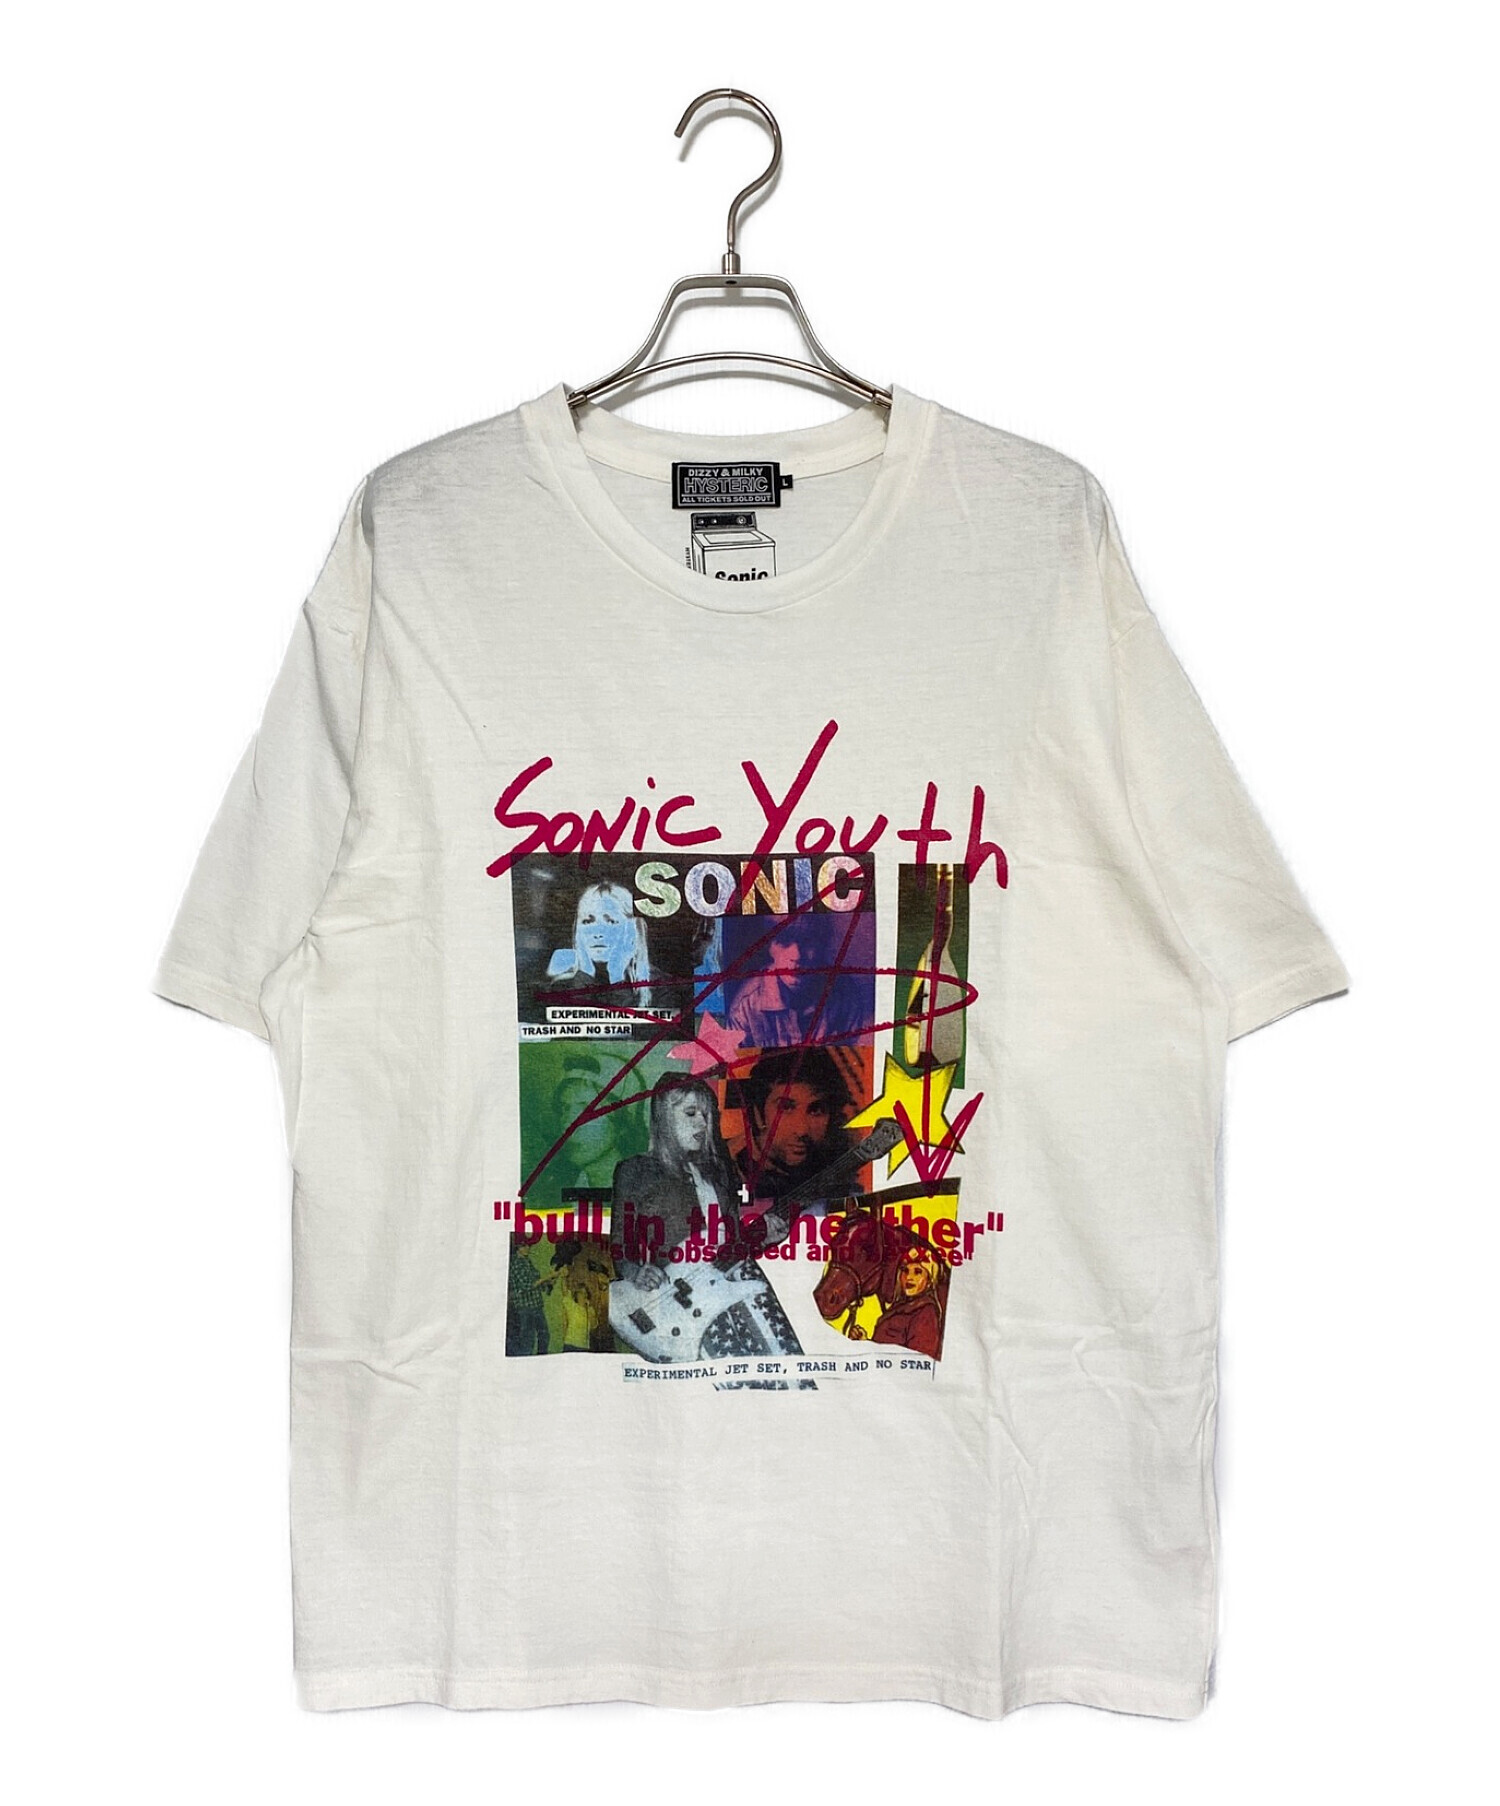 Hysteric Glamour (ヒステリックグラマー) SONIC YOUTH (ソニック・ユース) TRASH AND NO STAR Tシャツ  ホワイト サイズ:L